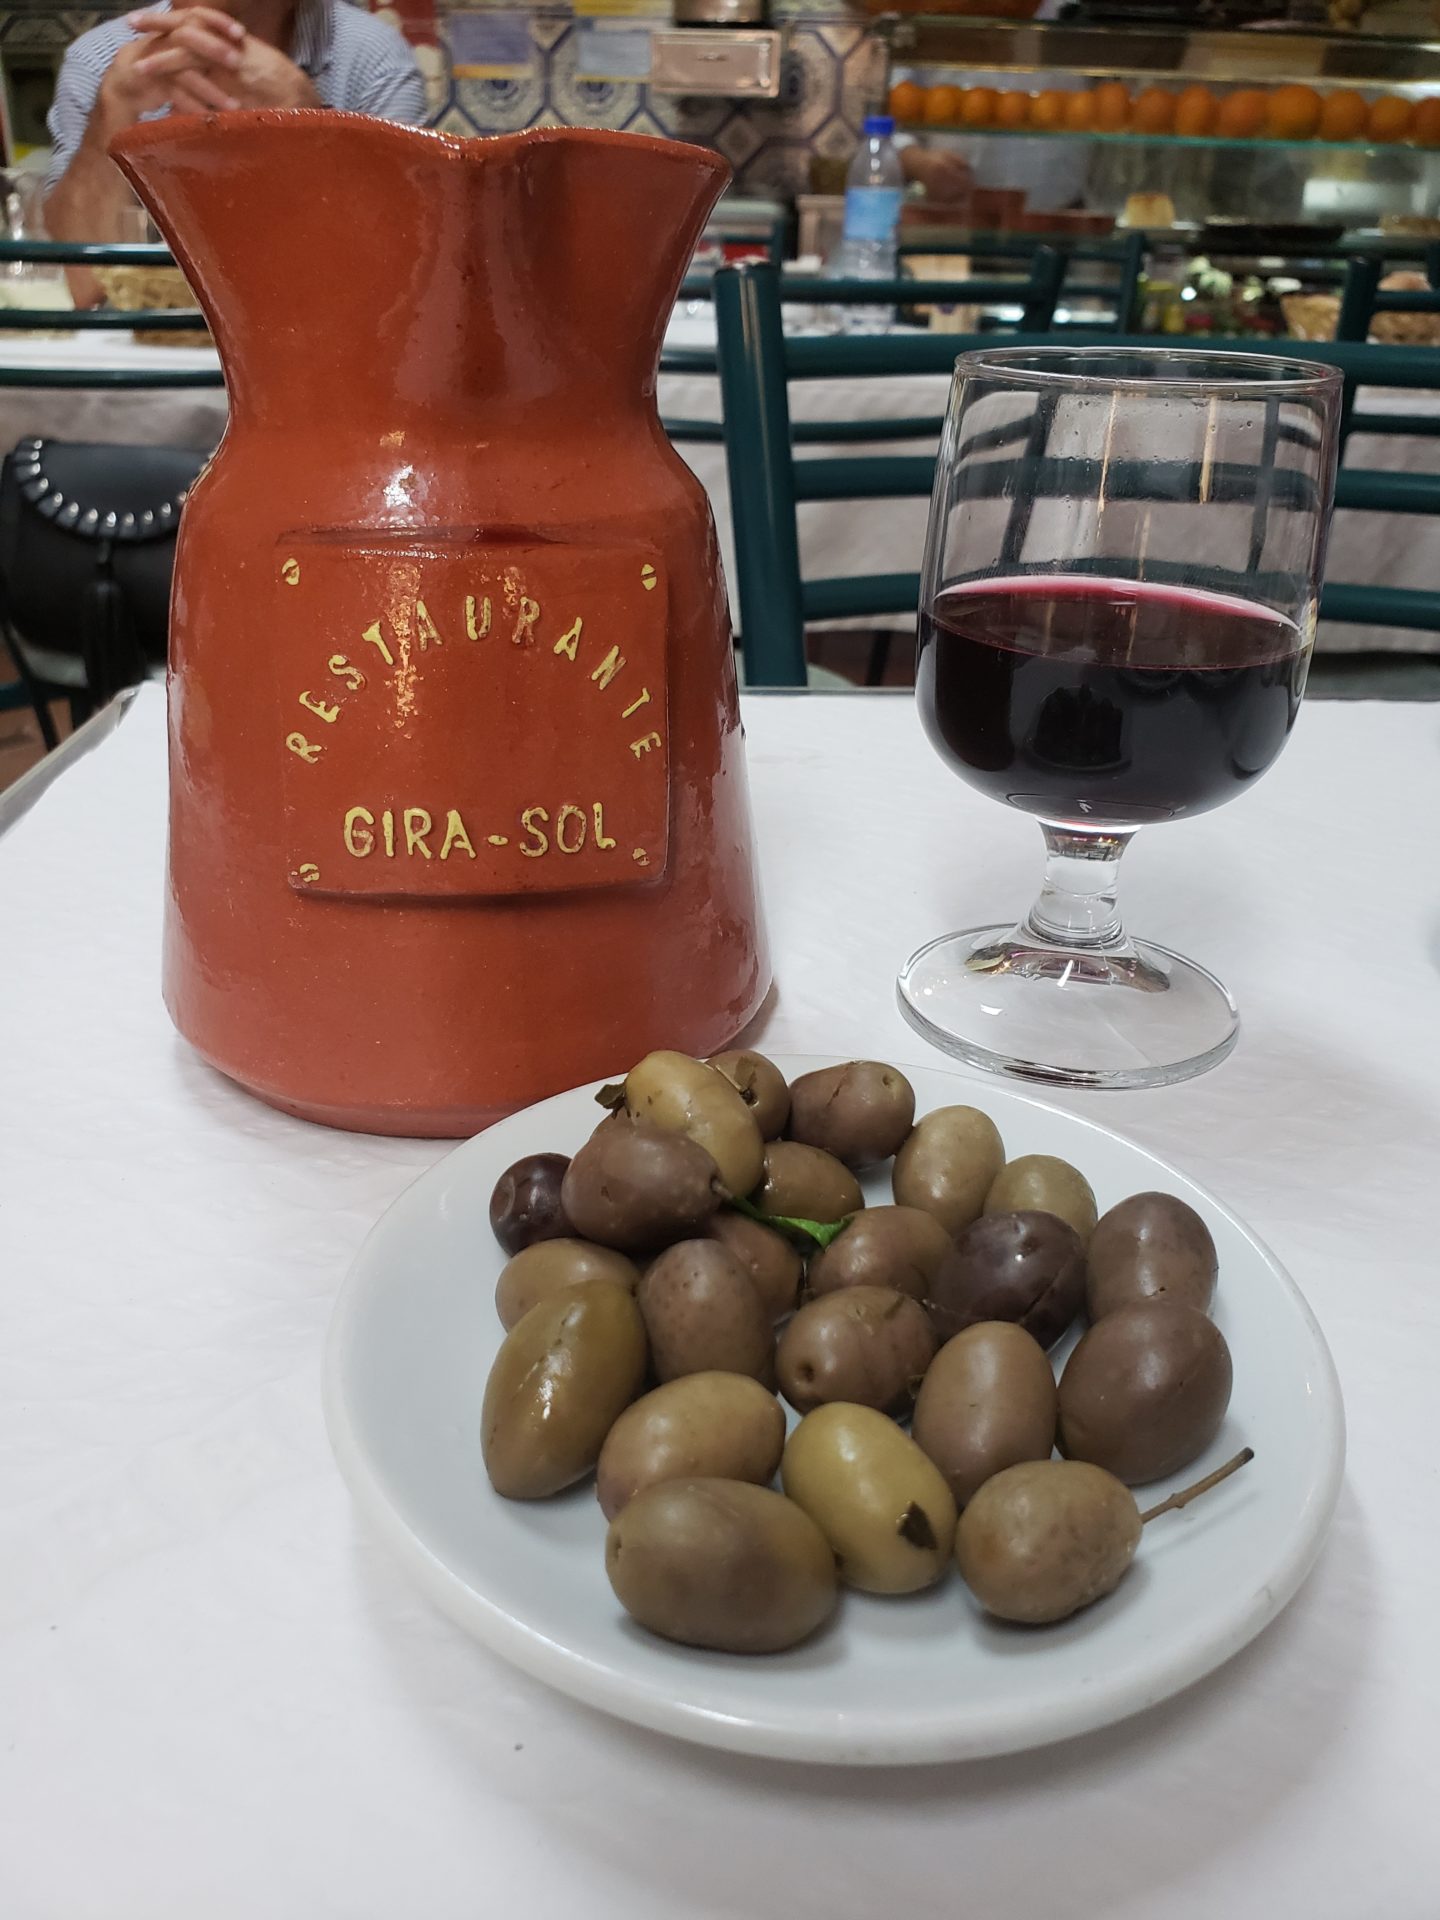 a plate of olives and a glass of wine